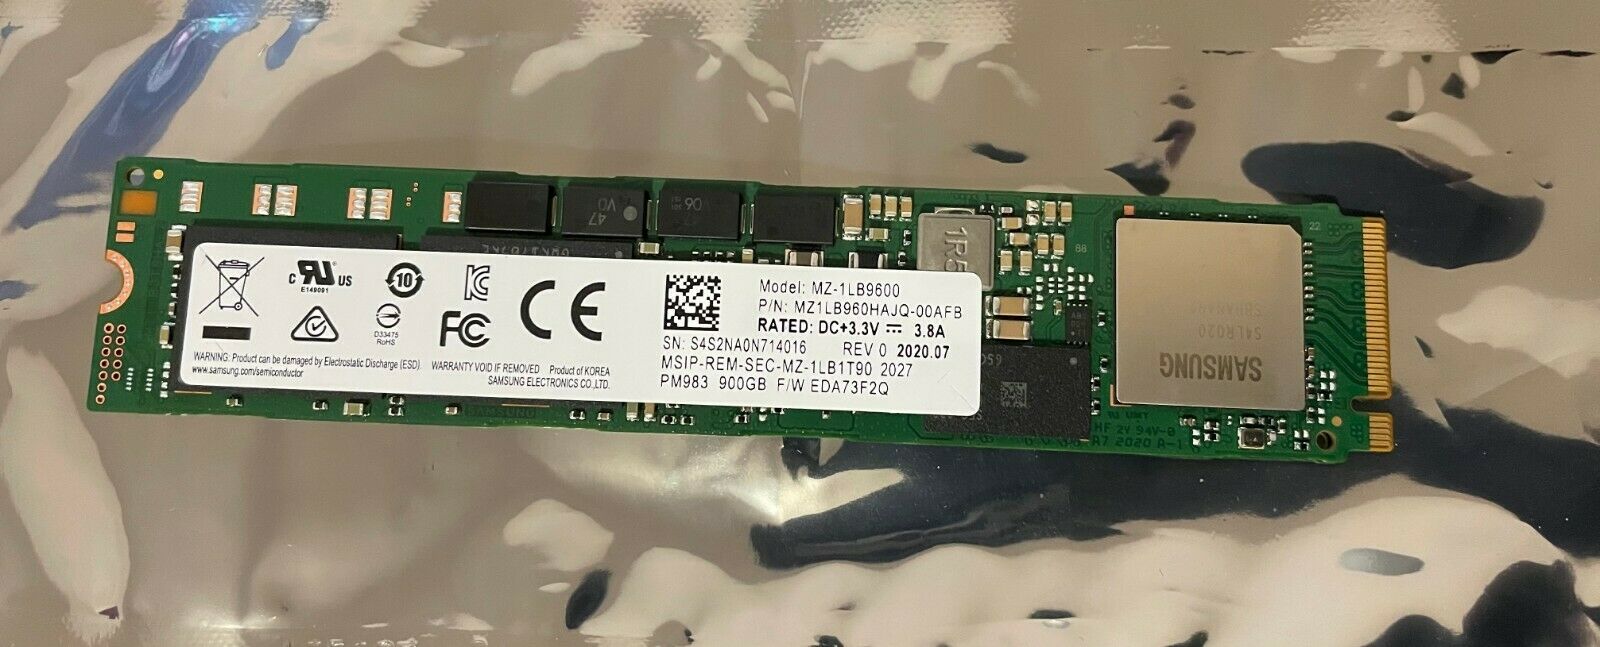 Samsung 900GB MZ-1LB9600 PM983 Series M.2 22110 NVMe Pcie 3.0x4 Enterprise (SSD) Solid State Drive (**Used Like New** )